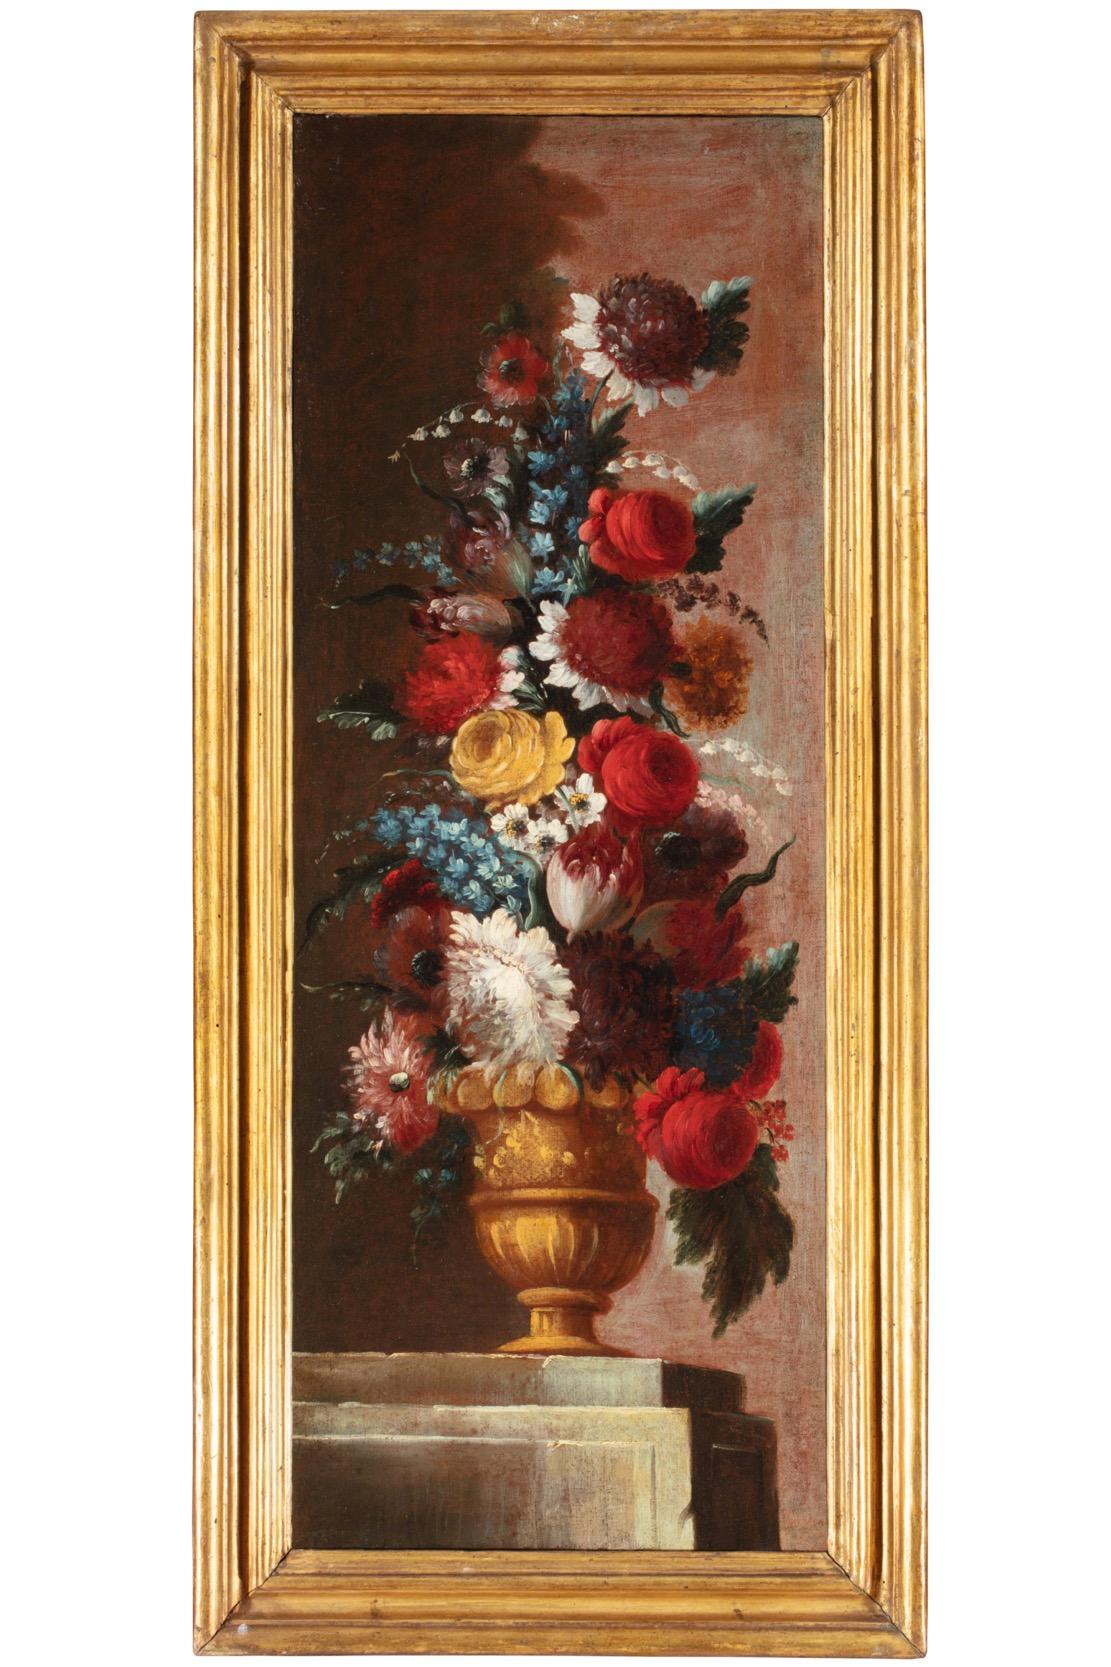 18th Century by Francesco Lavagna Pair of Flower Vases Oil on Canvas  - Painting by Francesco Lavagna (active in Naples in the mid-18th century)